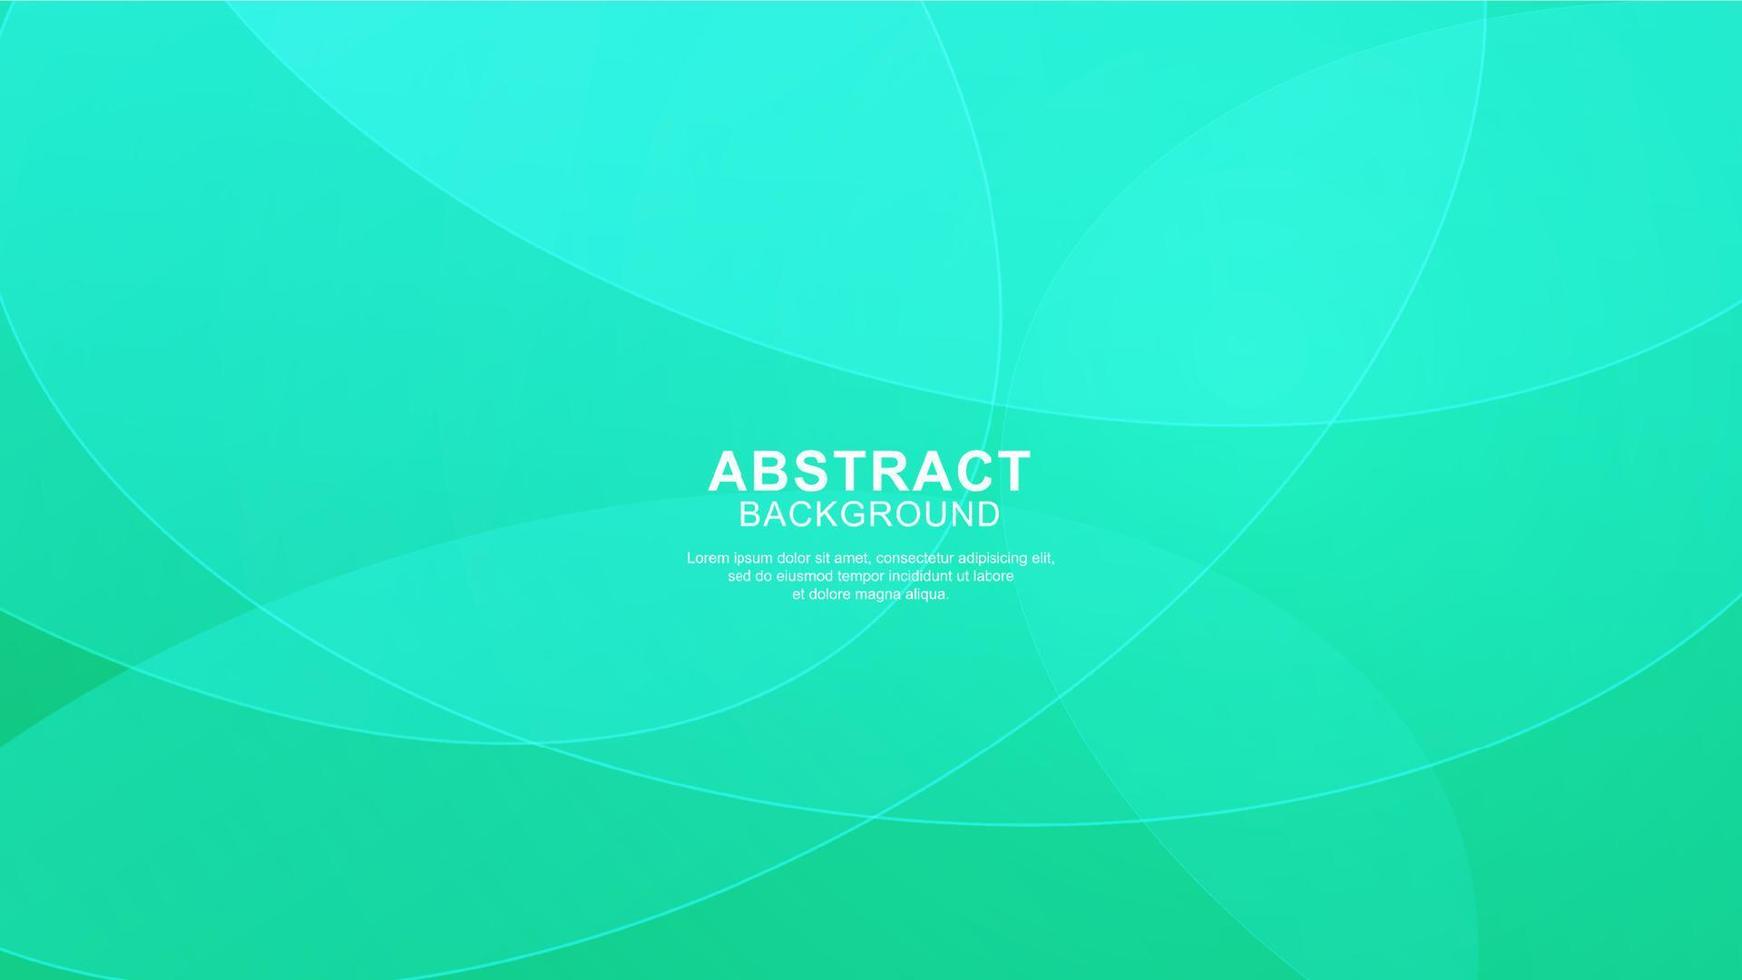 Modern curve style background design with vibrant colors vector